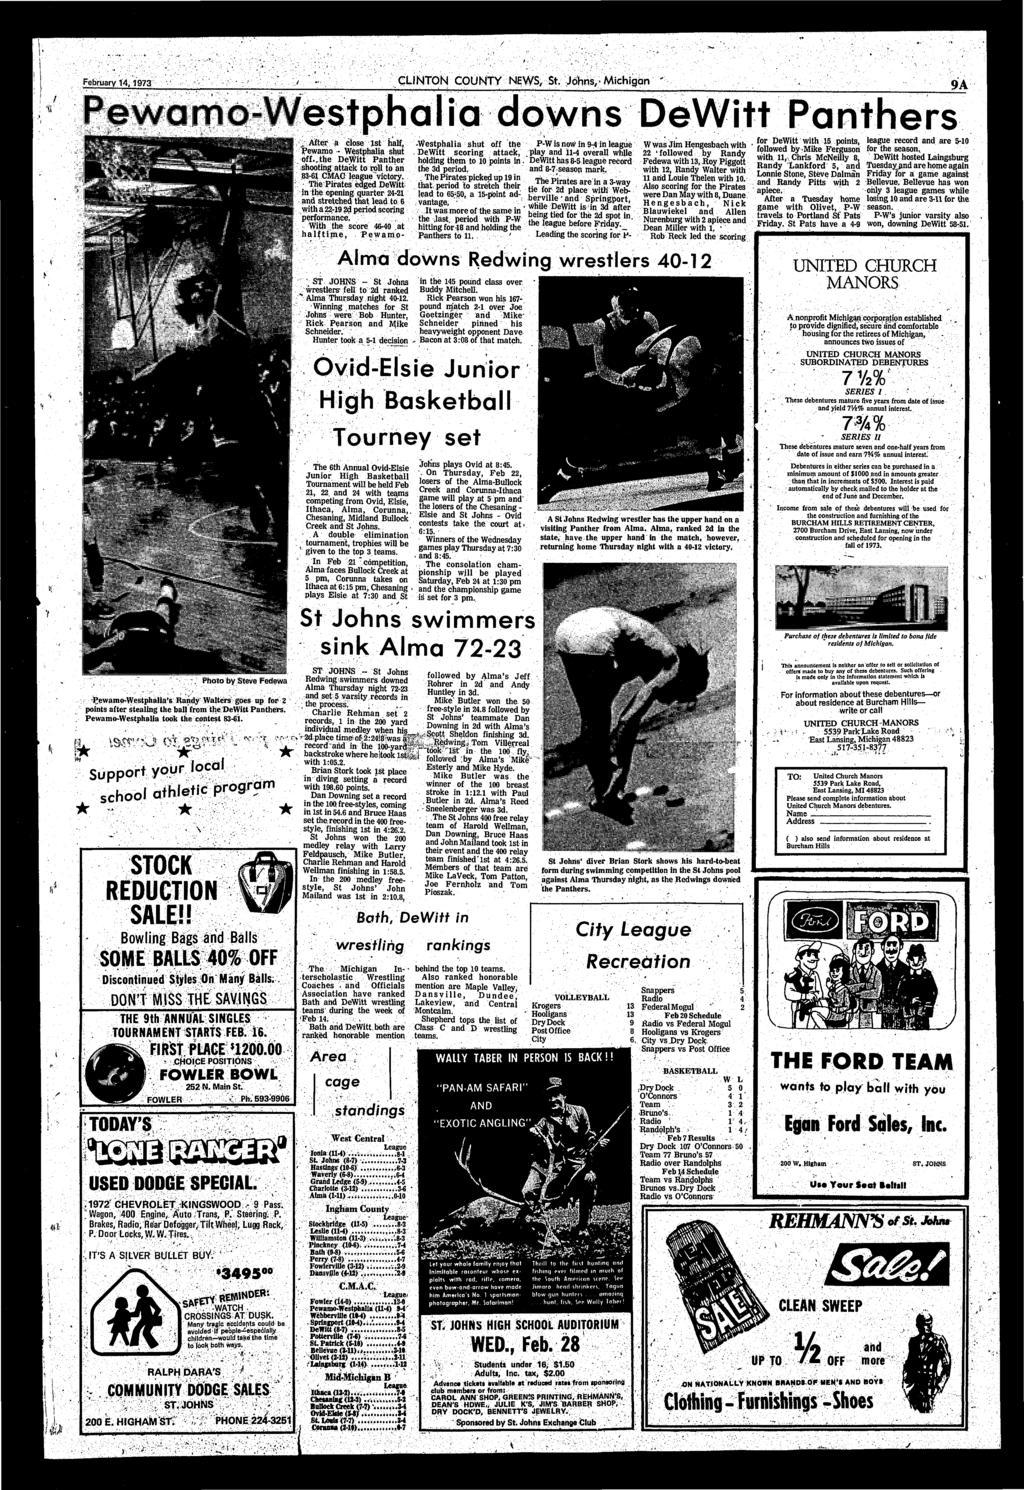 February 4,973 CLINTON COUNTY NEWS, St. Johns, Mchgan Pewamb-WestphaI a downs DeWtt Panthers 9A t * *>.